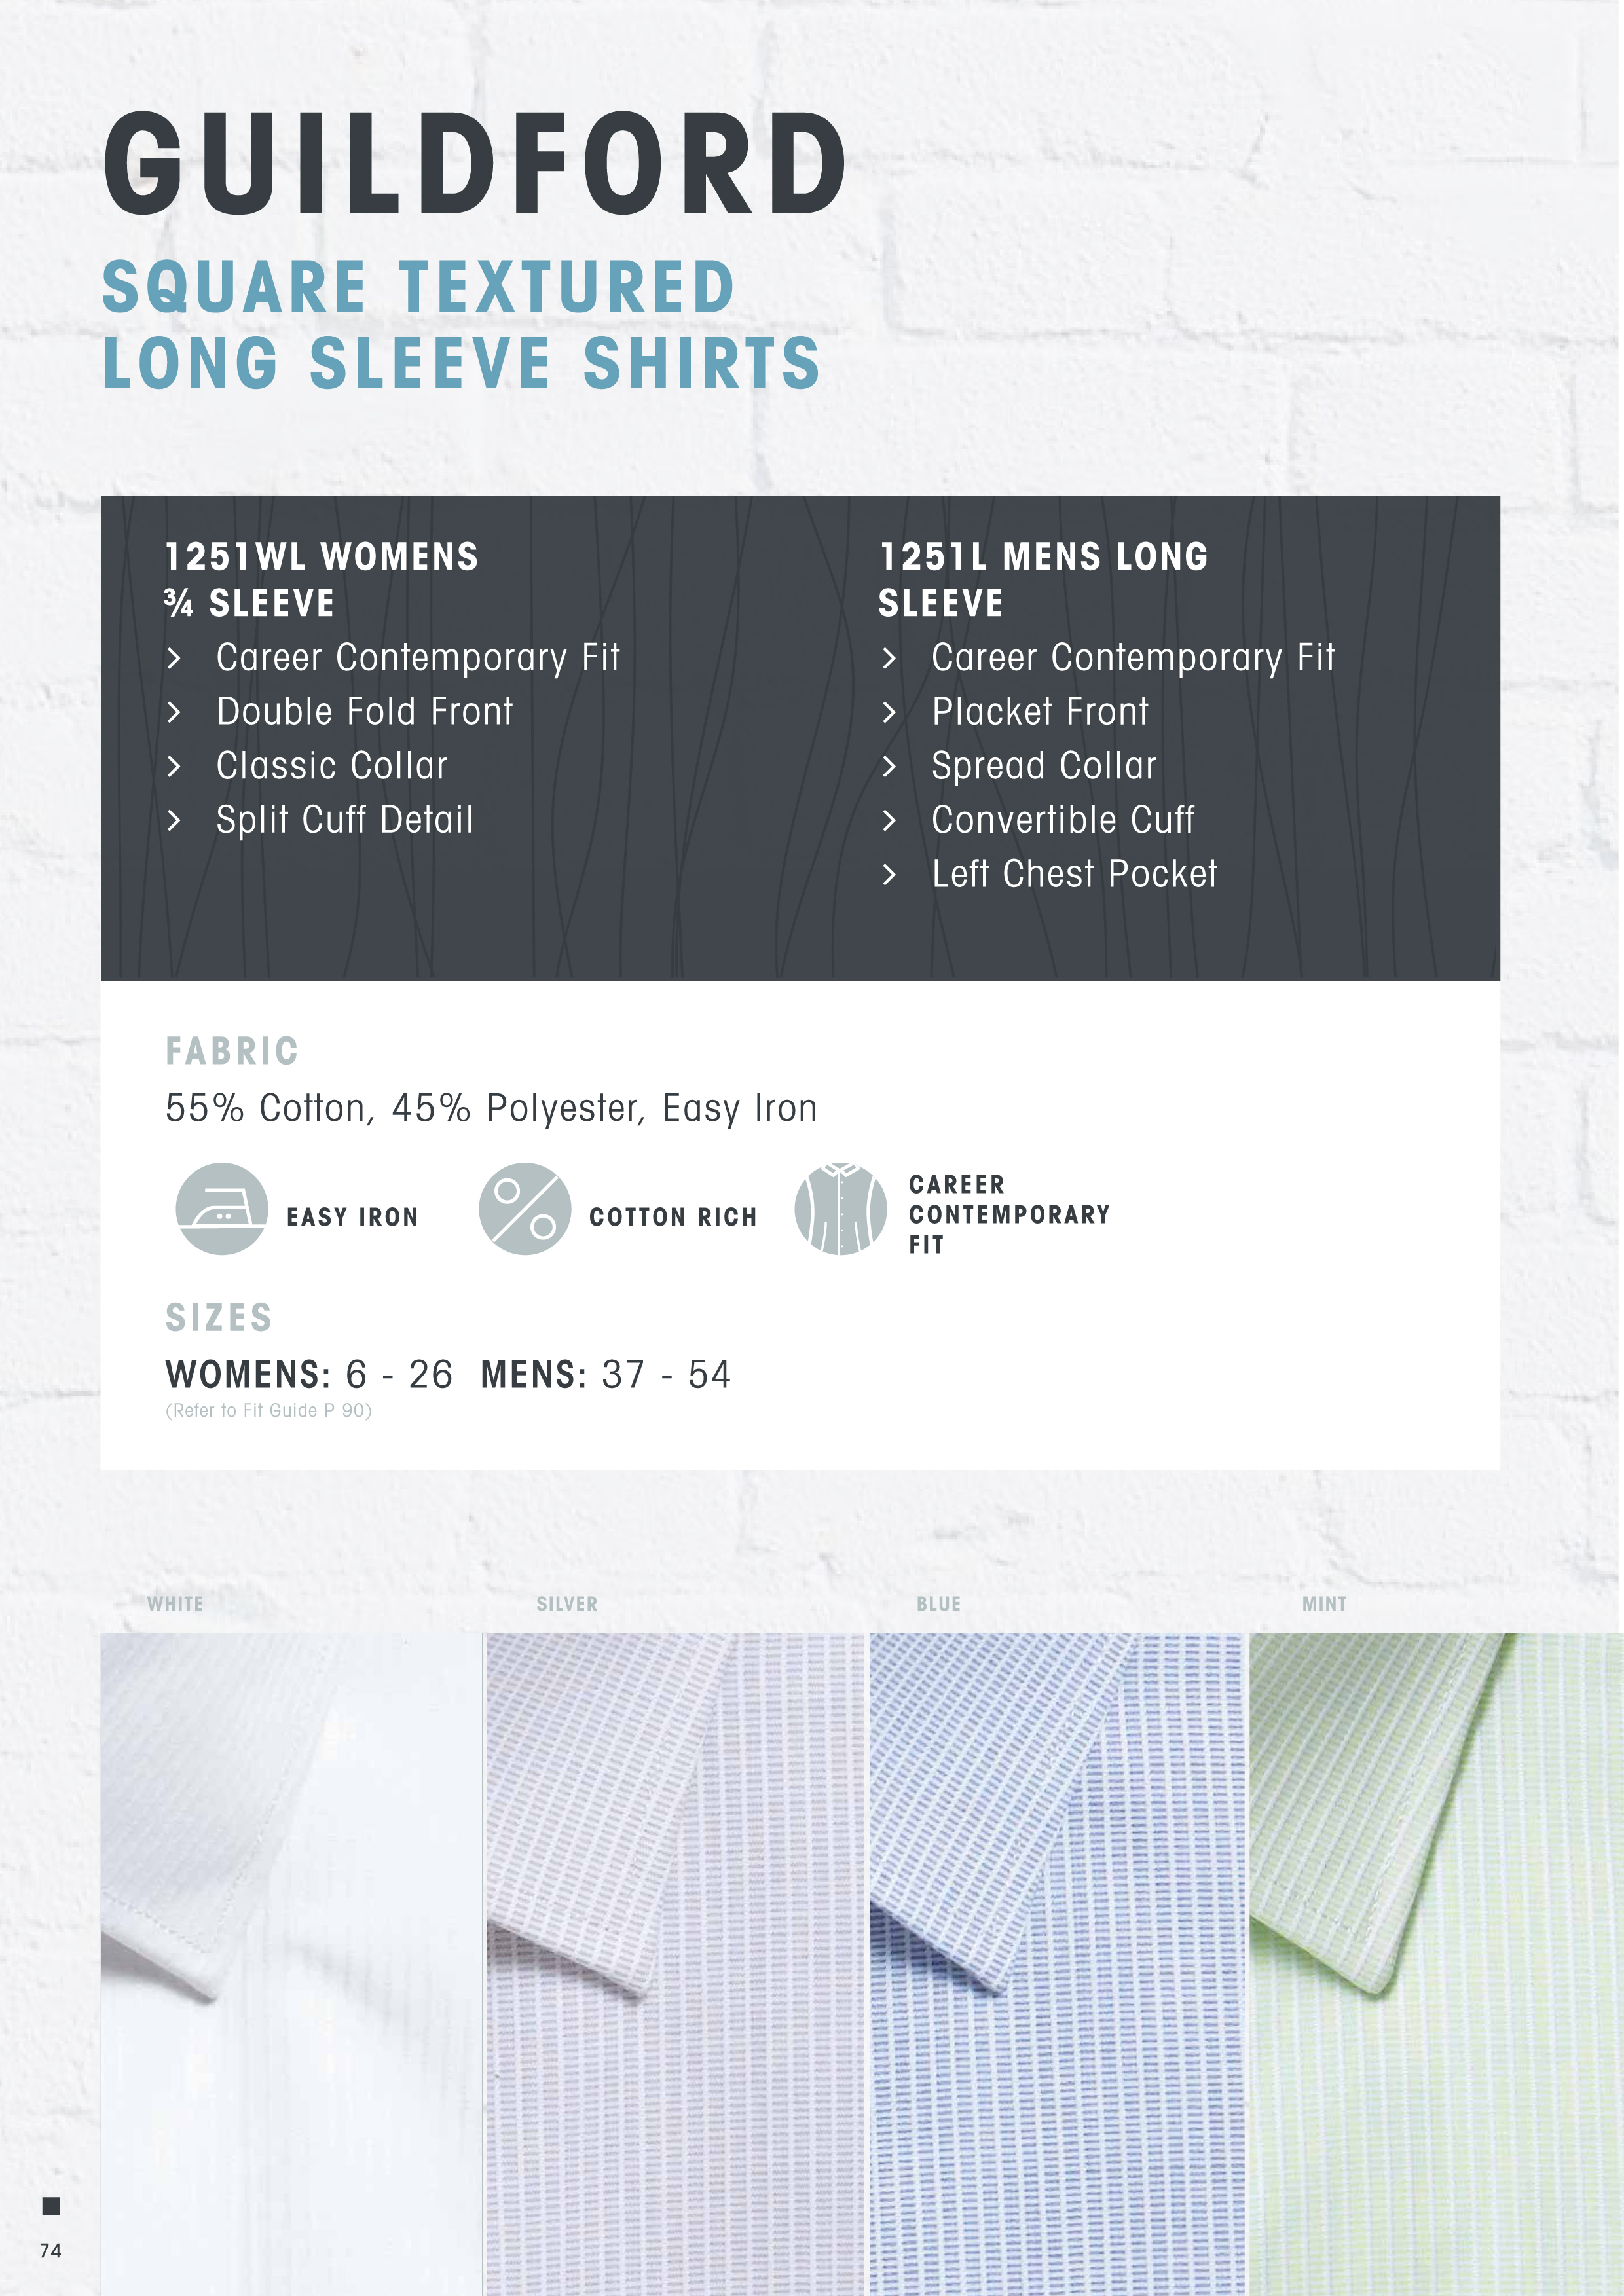 Guildford Corporate Shirt #1251L by Gloweave With Logo Service Colour Card. Available White, Blue, Silver and Mint. Mens has a Chest Pocket. Mens can be worn with a Tie or Open Neck. Cotton Rich 55% with Easy Iron Treatment. Mens Sizes up to Size 54. Corporate Sales Call Free 1800 654 990